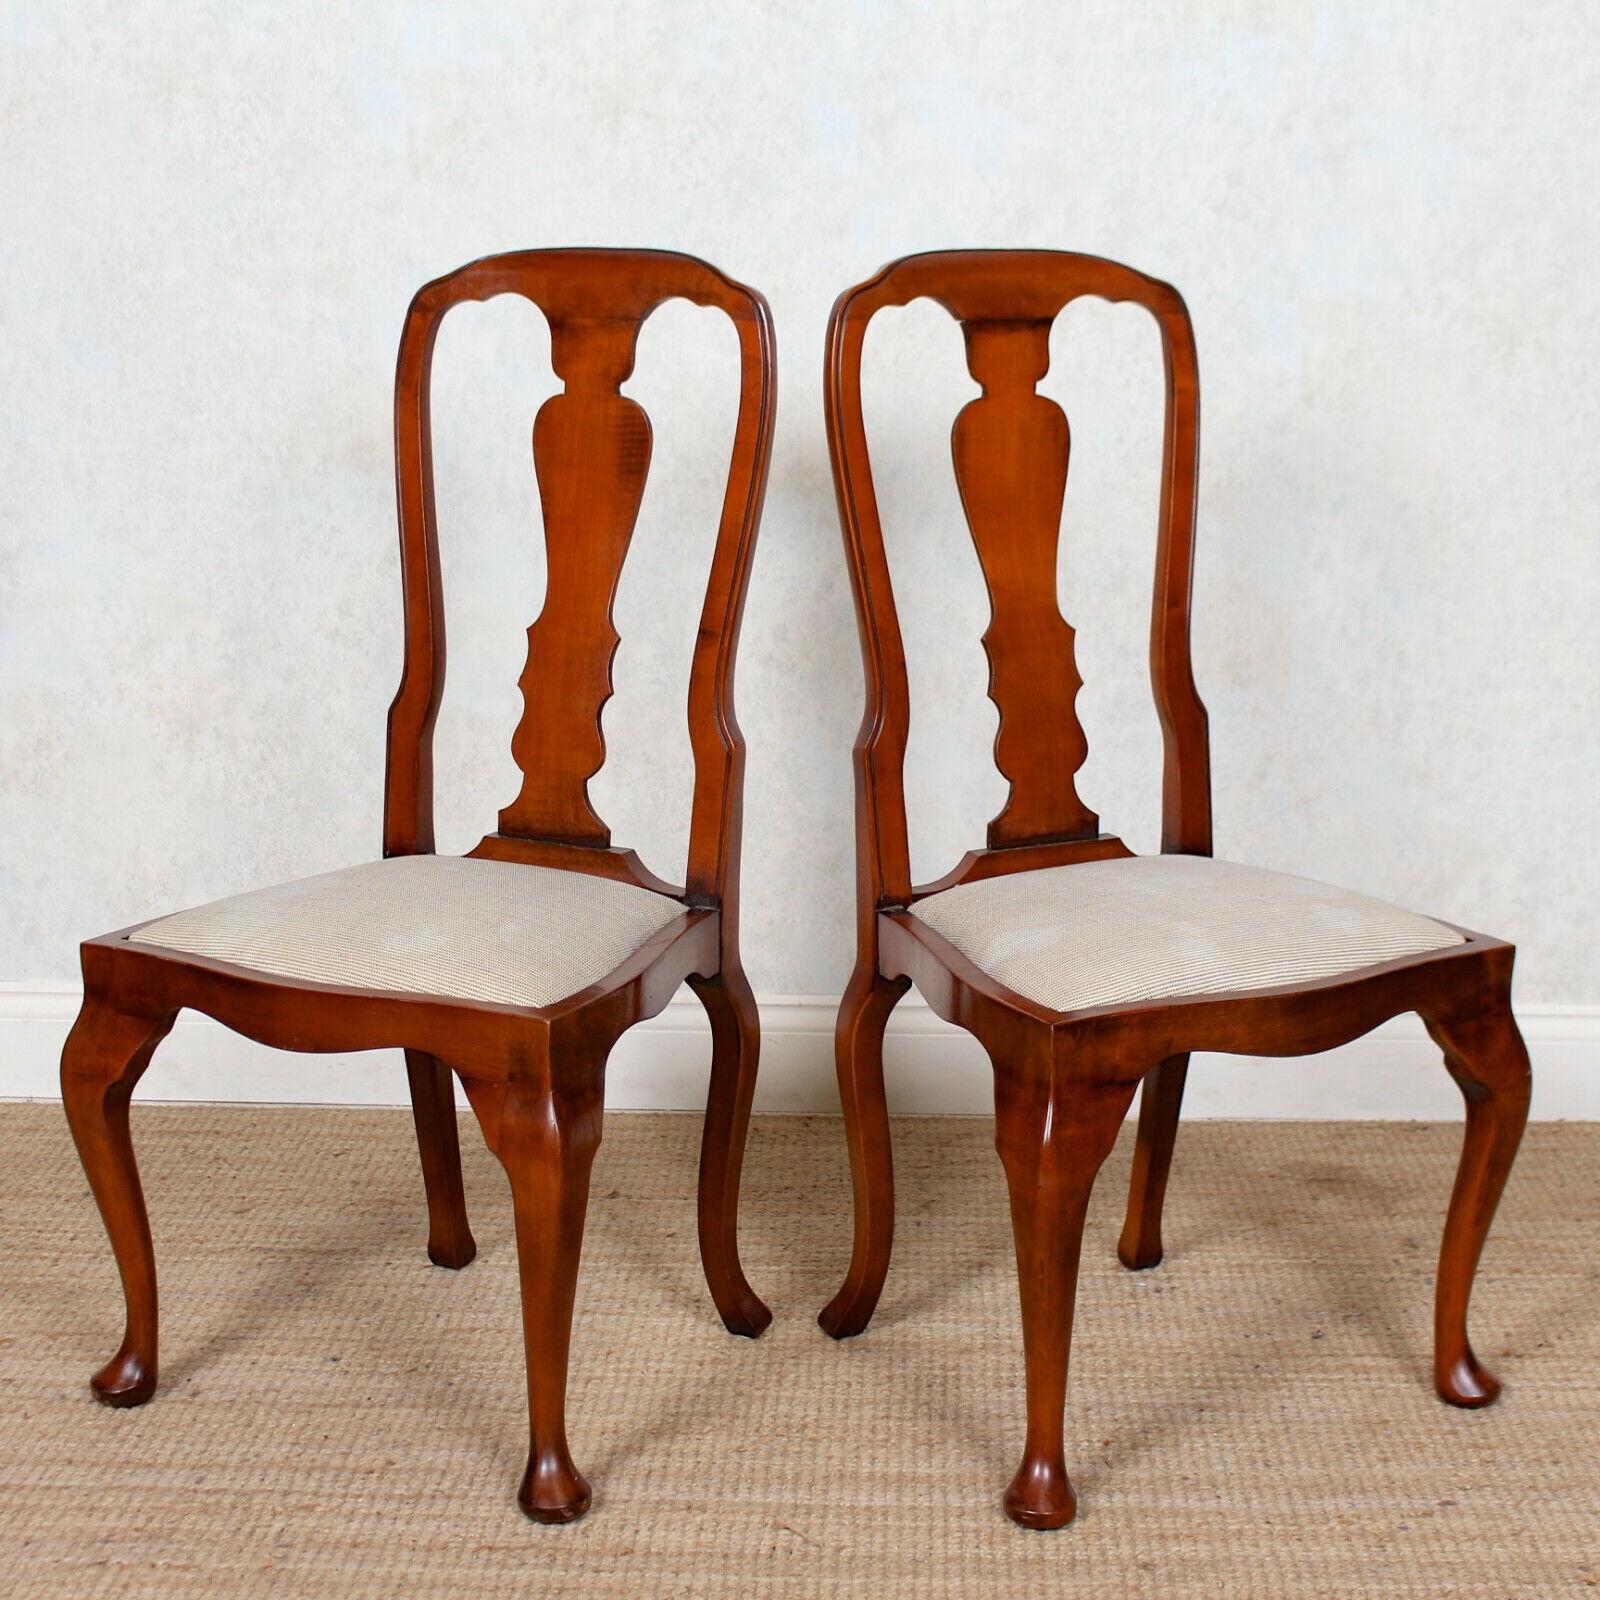 20th Century 6 English Queen Anne Dining Chairs Antique Vintage